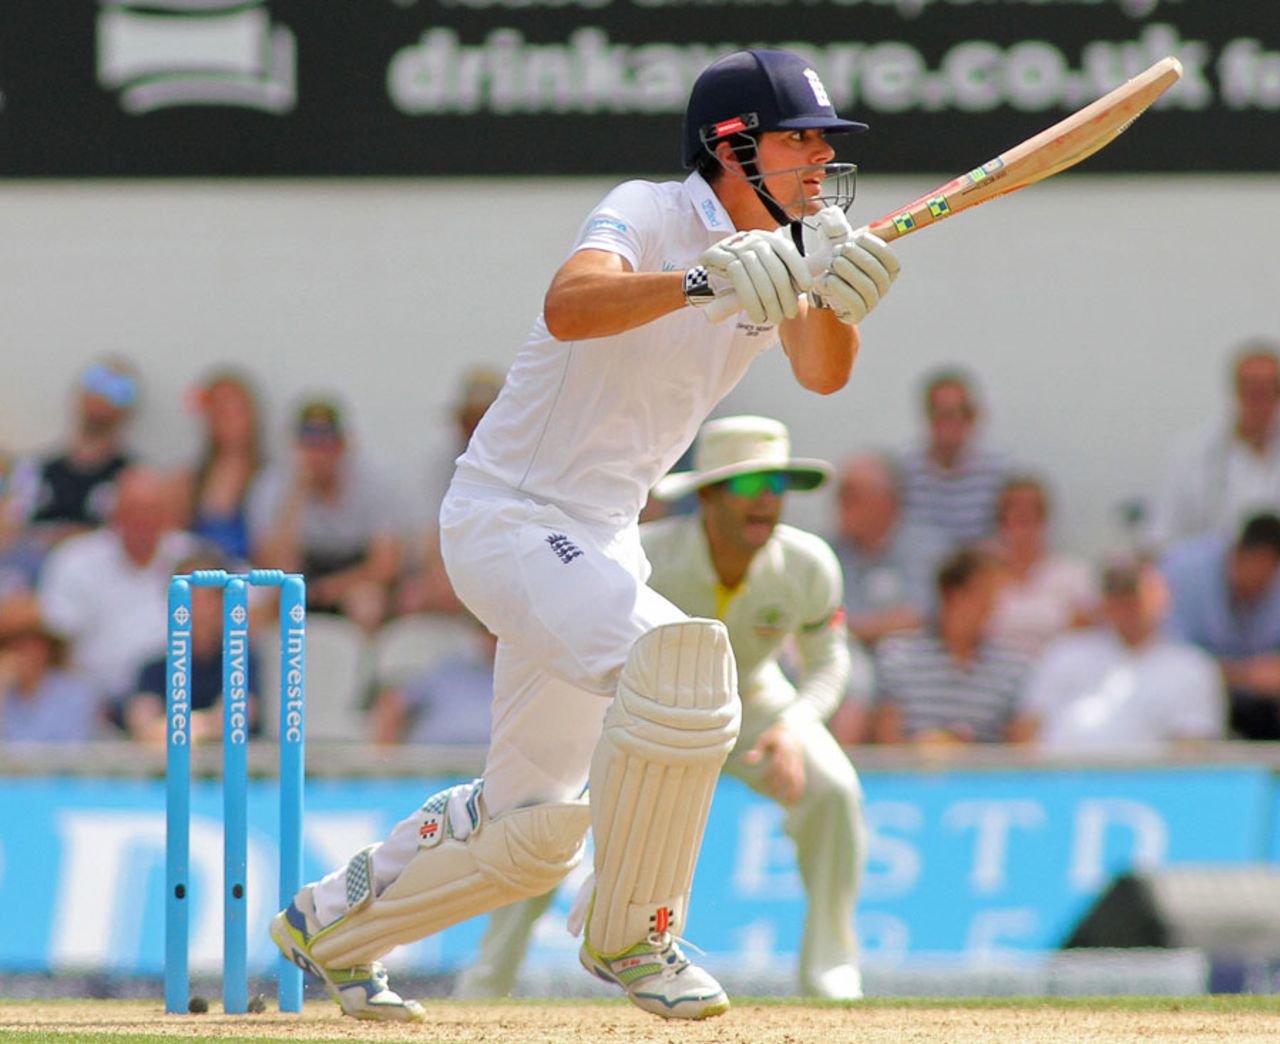 Alastair Cook unfurls a drive as he leads England's resistance, England v Australia, 5th Investec Ashes Test, The Oval, 3rd day, August 22, 2015